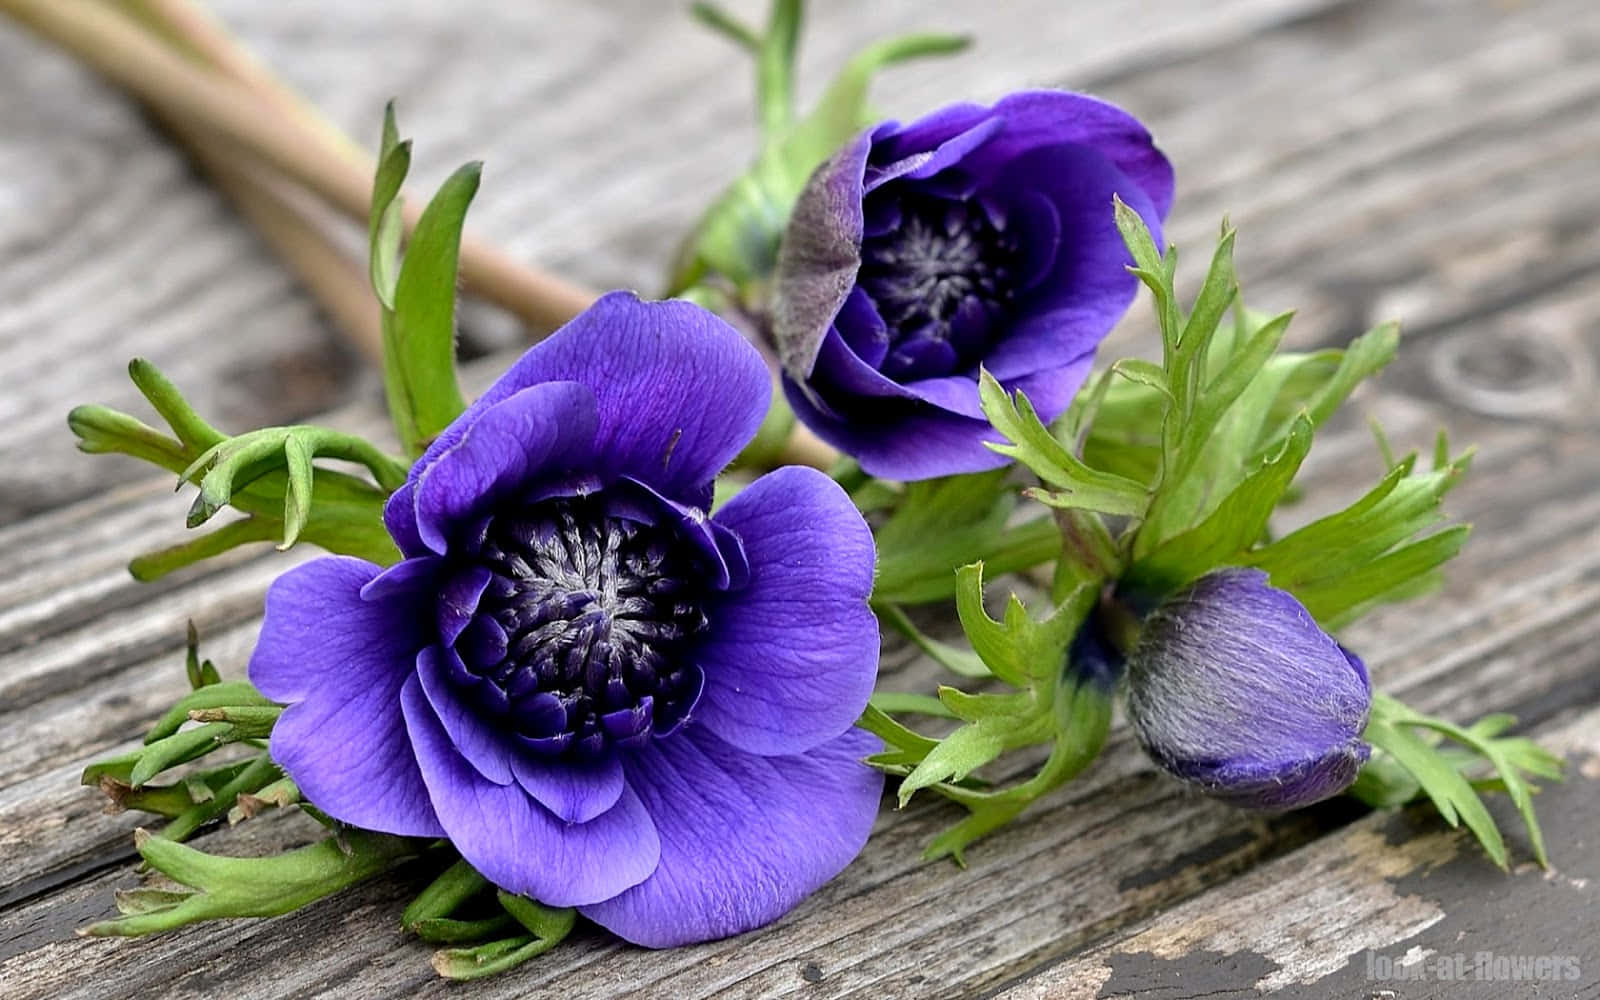 The graceful beauty of an anemone flower